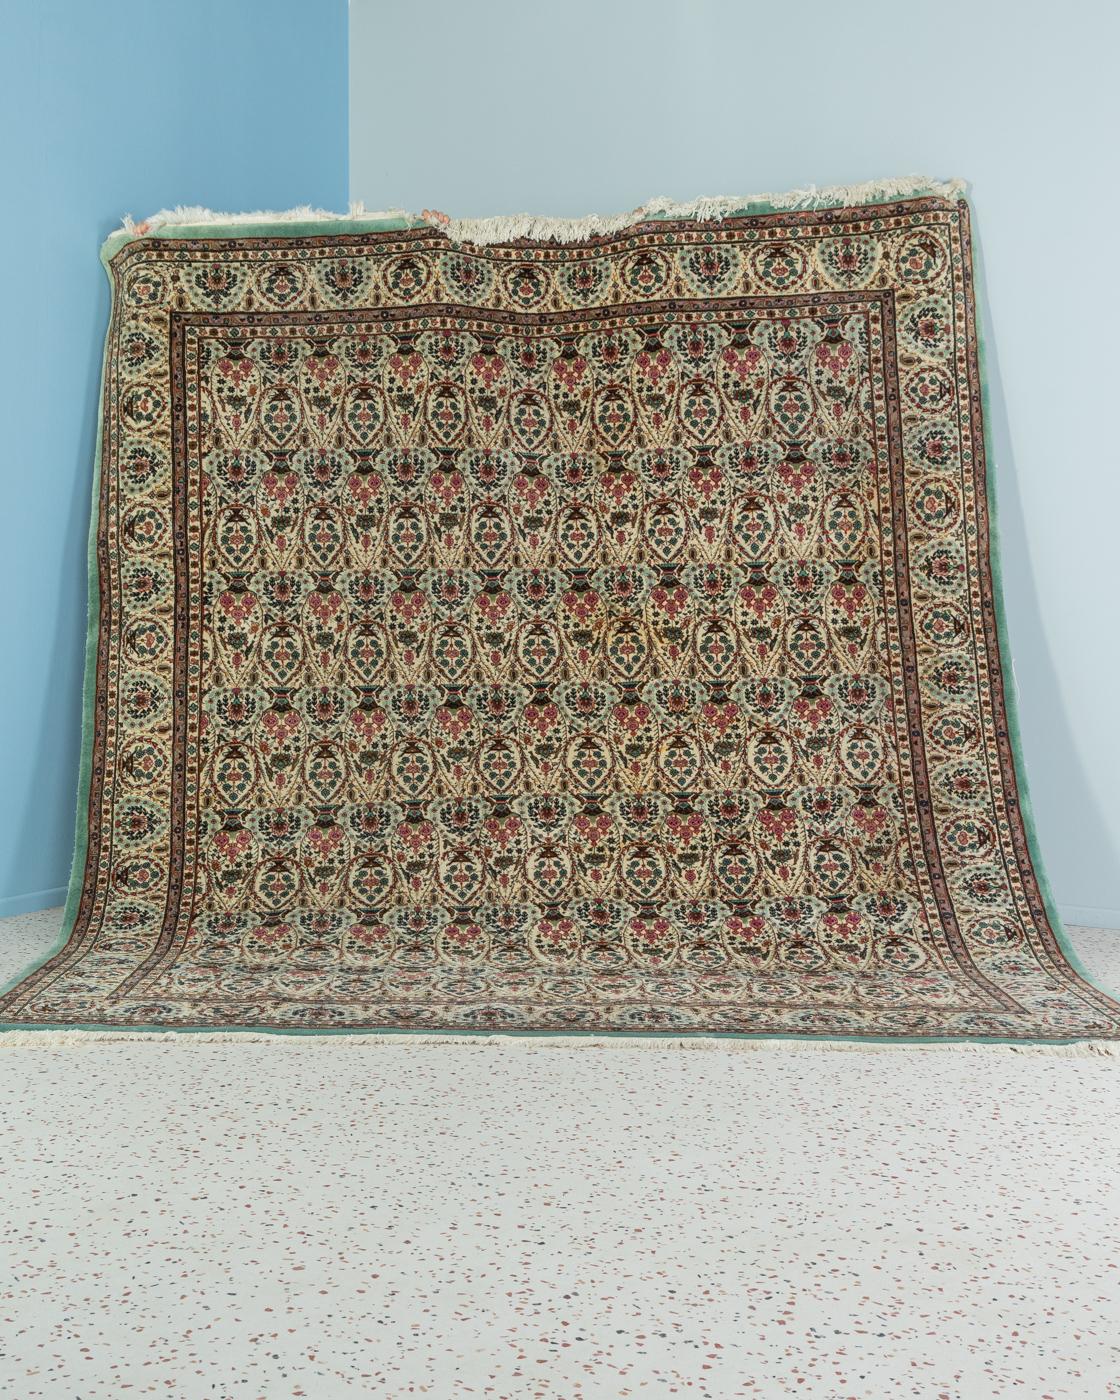 Wonderful oriental rug from the 1960s. High-quality pile with floral patterns in shades of cream, beige, green, red, mint and pink.

Quality Features:
Orientel carpet
Hand knotted
approx. 160,000 knots per m2
50-60 years old
100% virgin